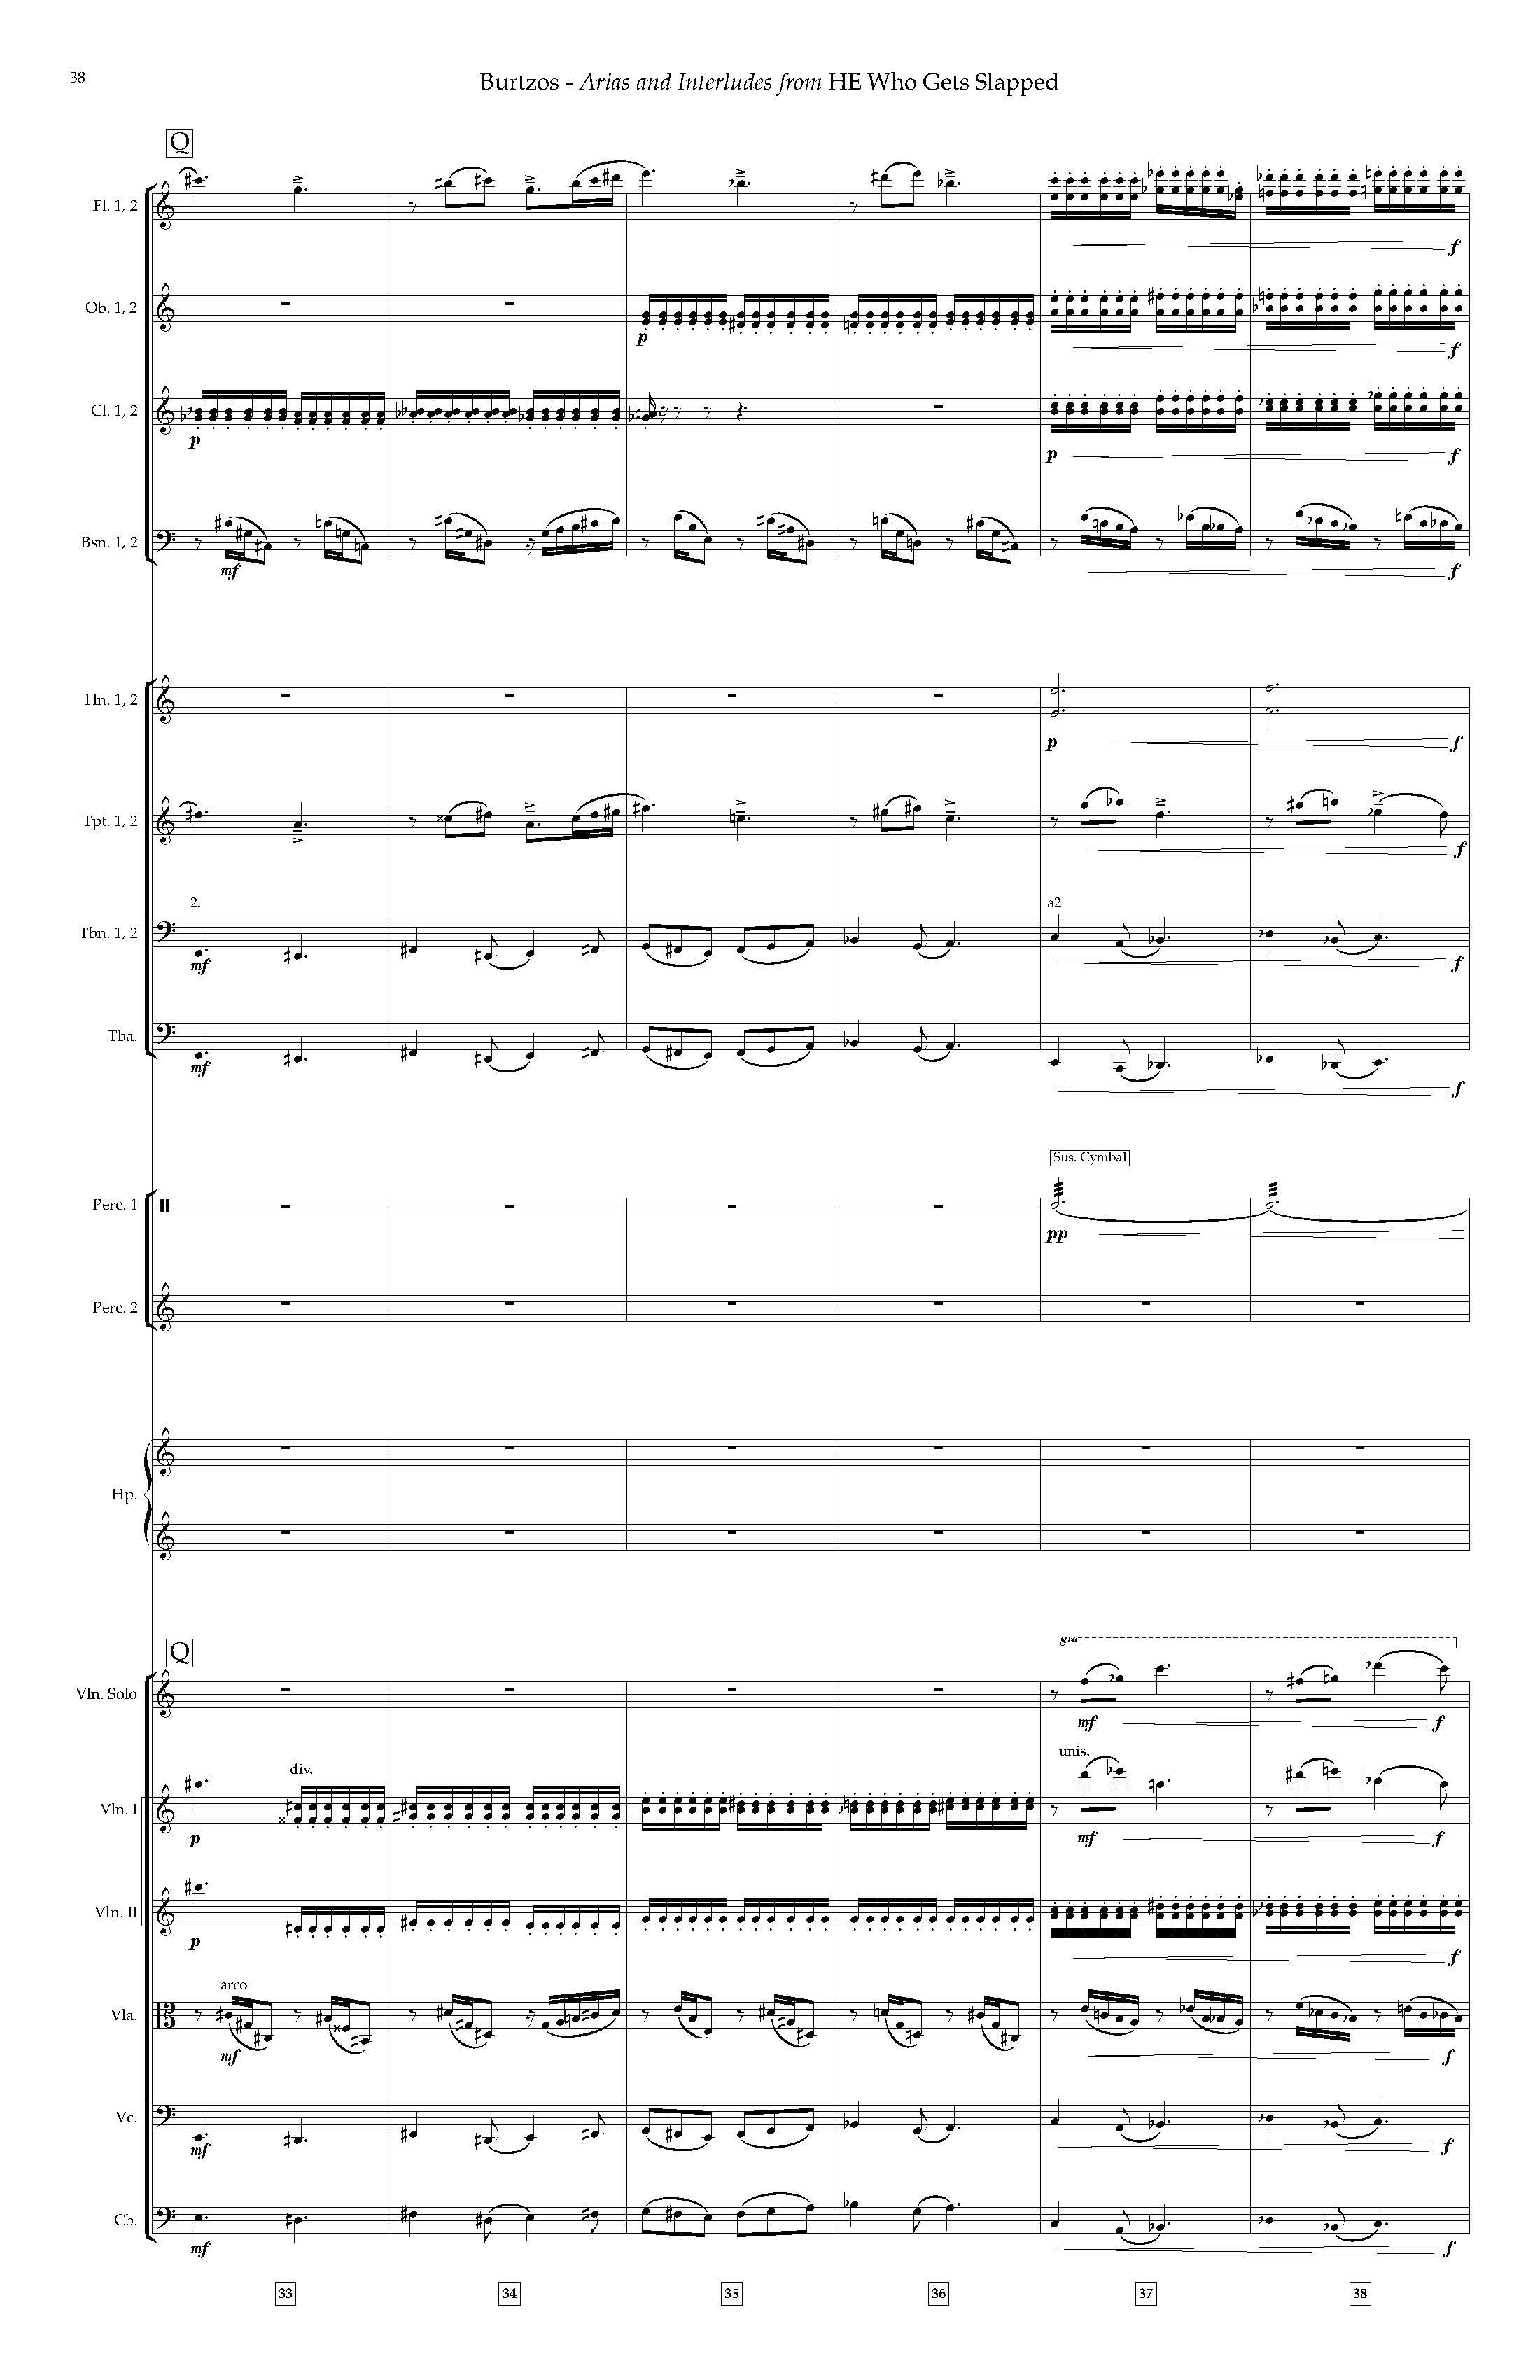 Arias and Interludes from HWGS - Complete Score_Page_44.jpg